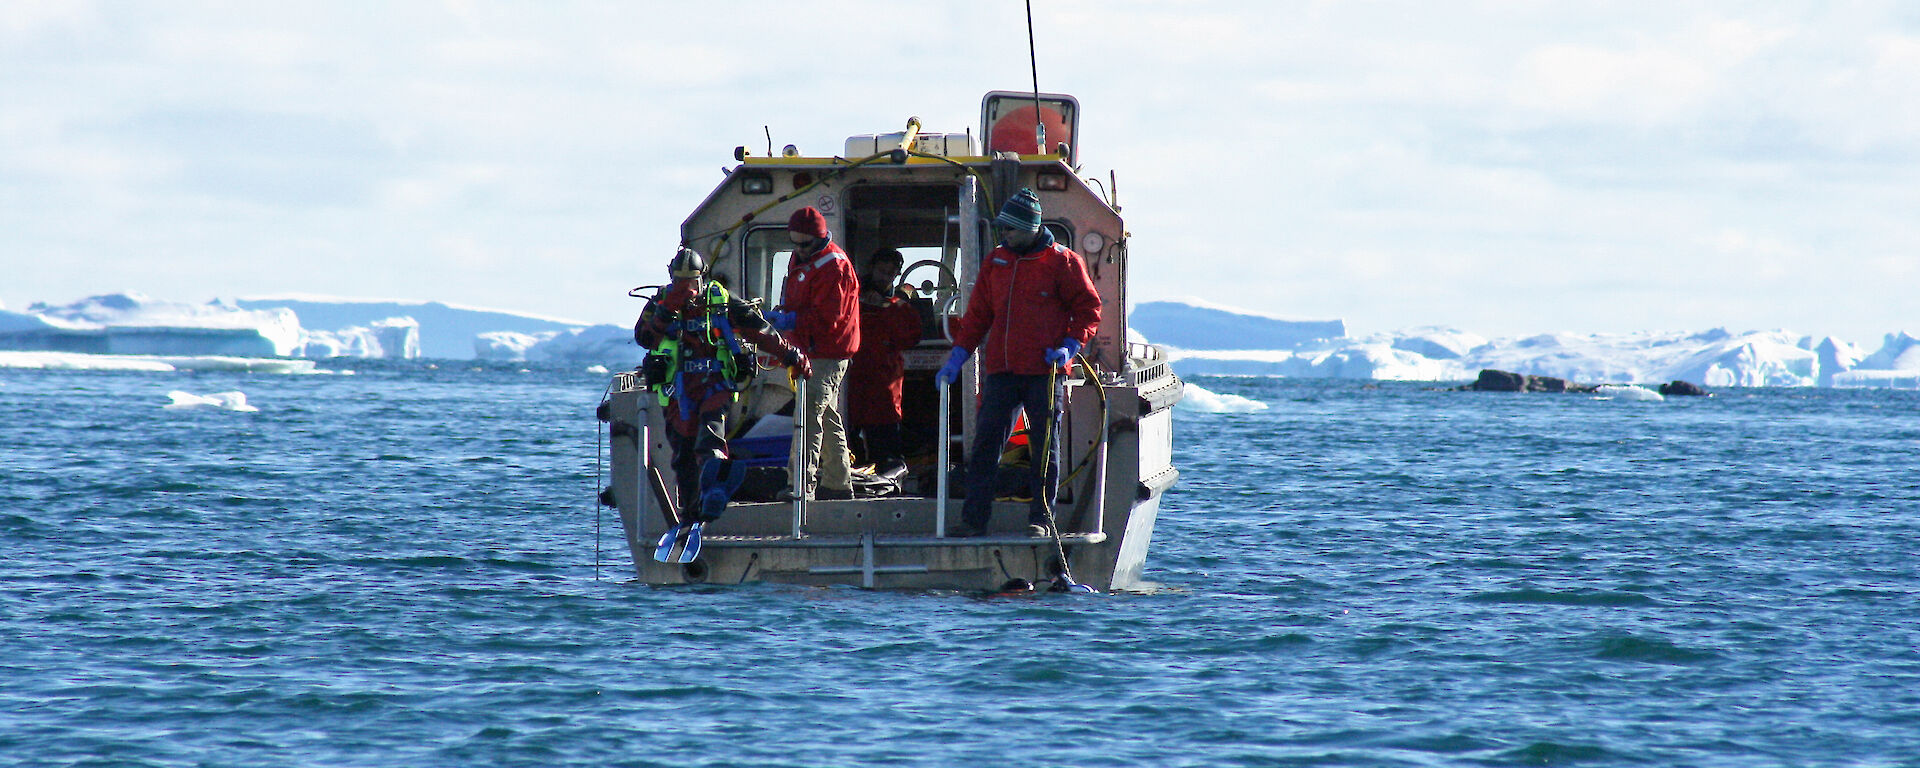 Divers enter the water from a small work boat to conduct an environmental impact assessment in the water near Davis.